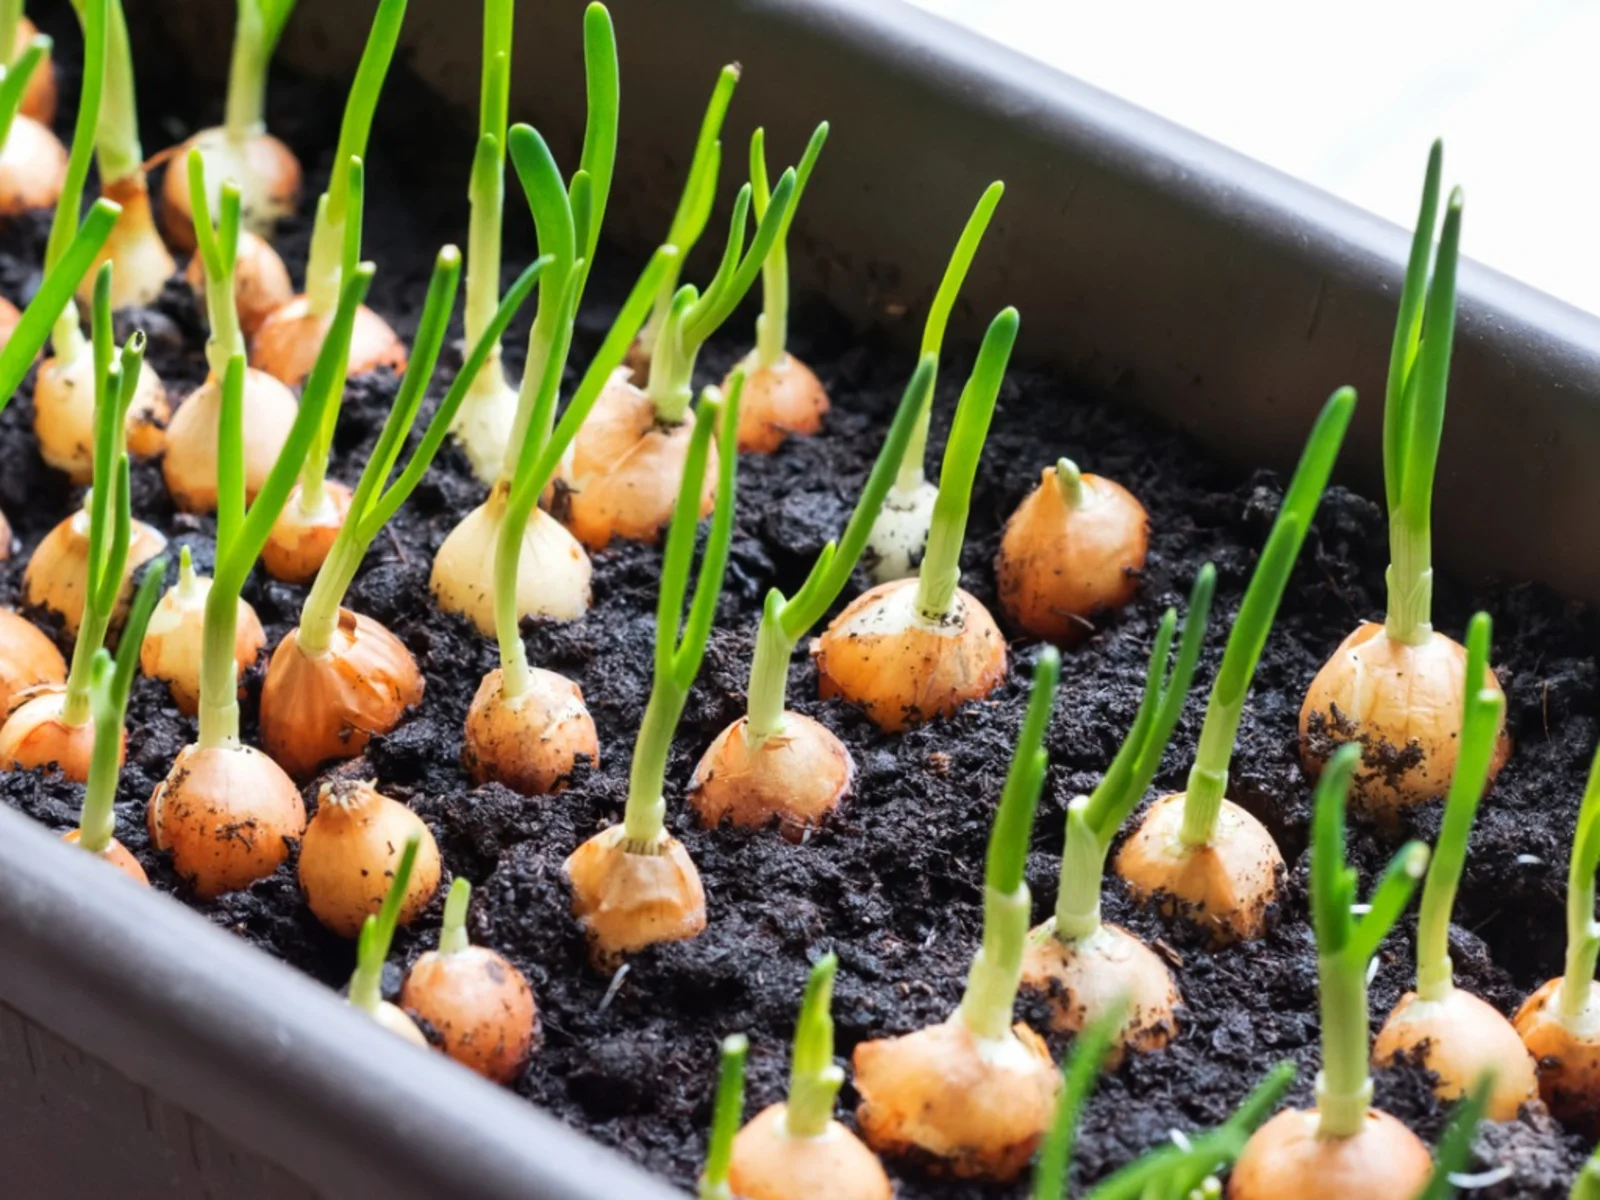 How To Plant Onion Seeds